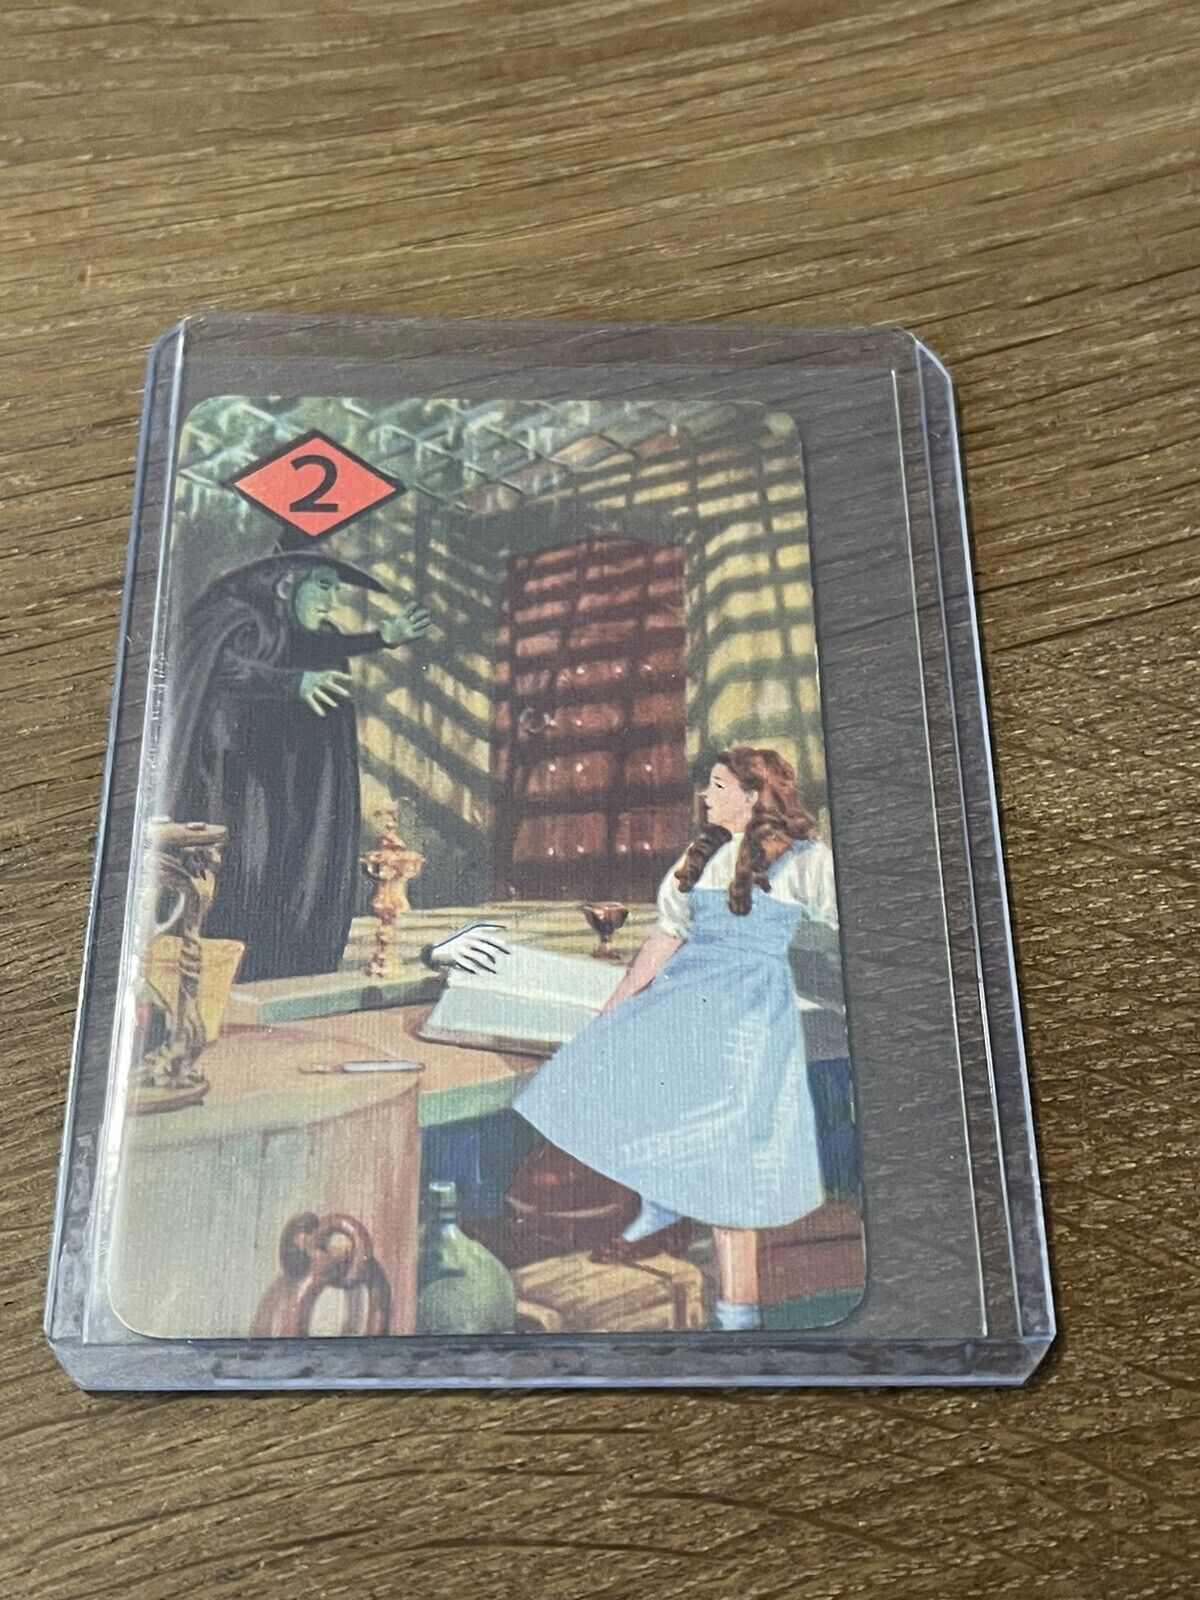 1940 Castell Wizard Of Oz DOROTHY & WICKED WITCH KEY SET ROOKIE CARD RARE